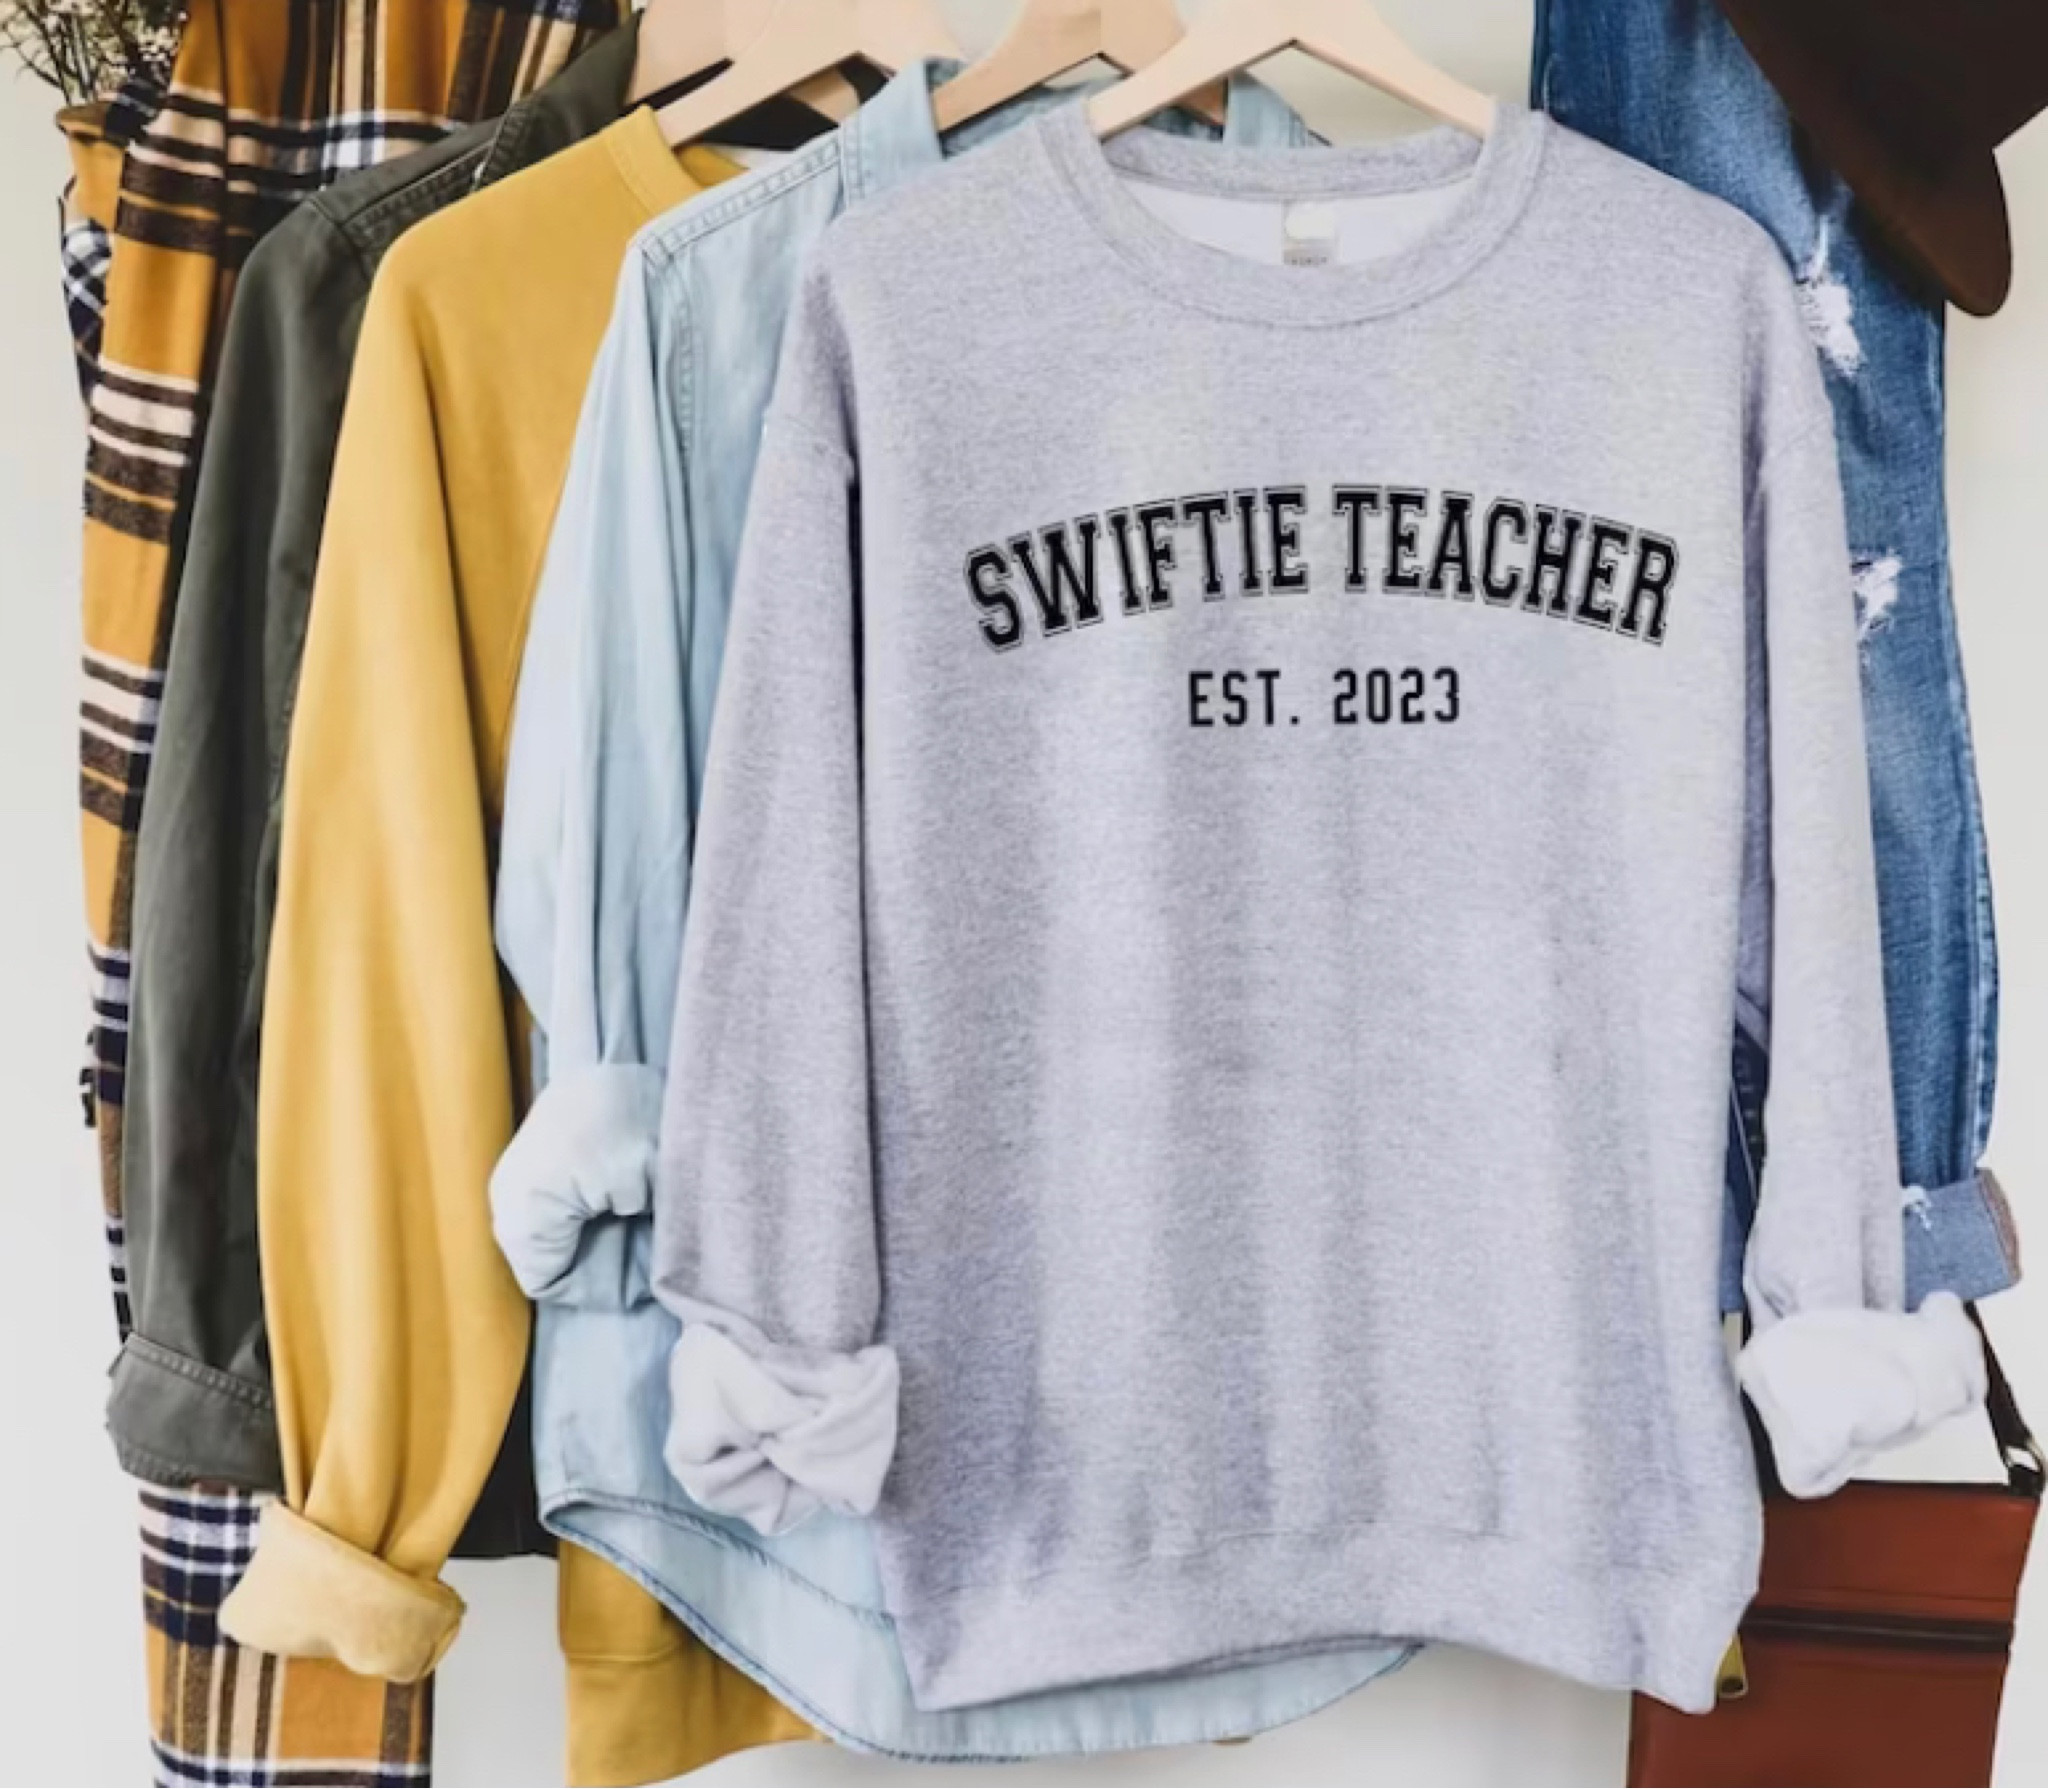 Swiftie Inspired Classroom Decor … curated on LTK